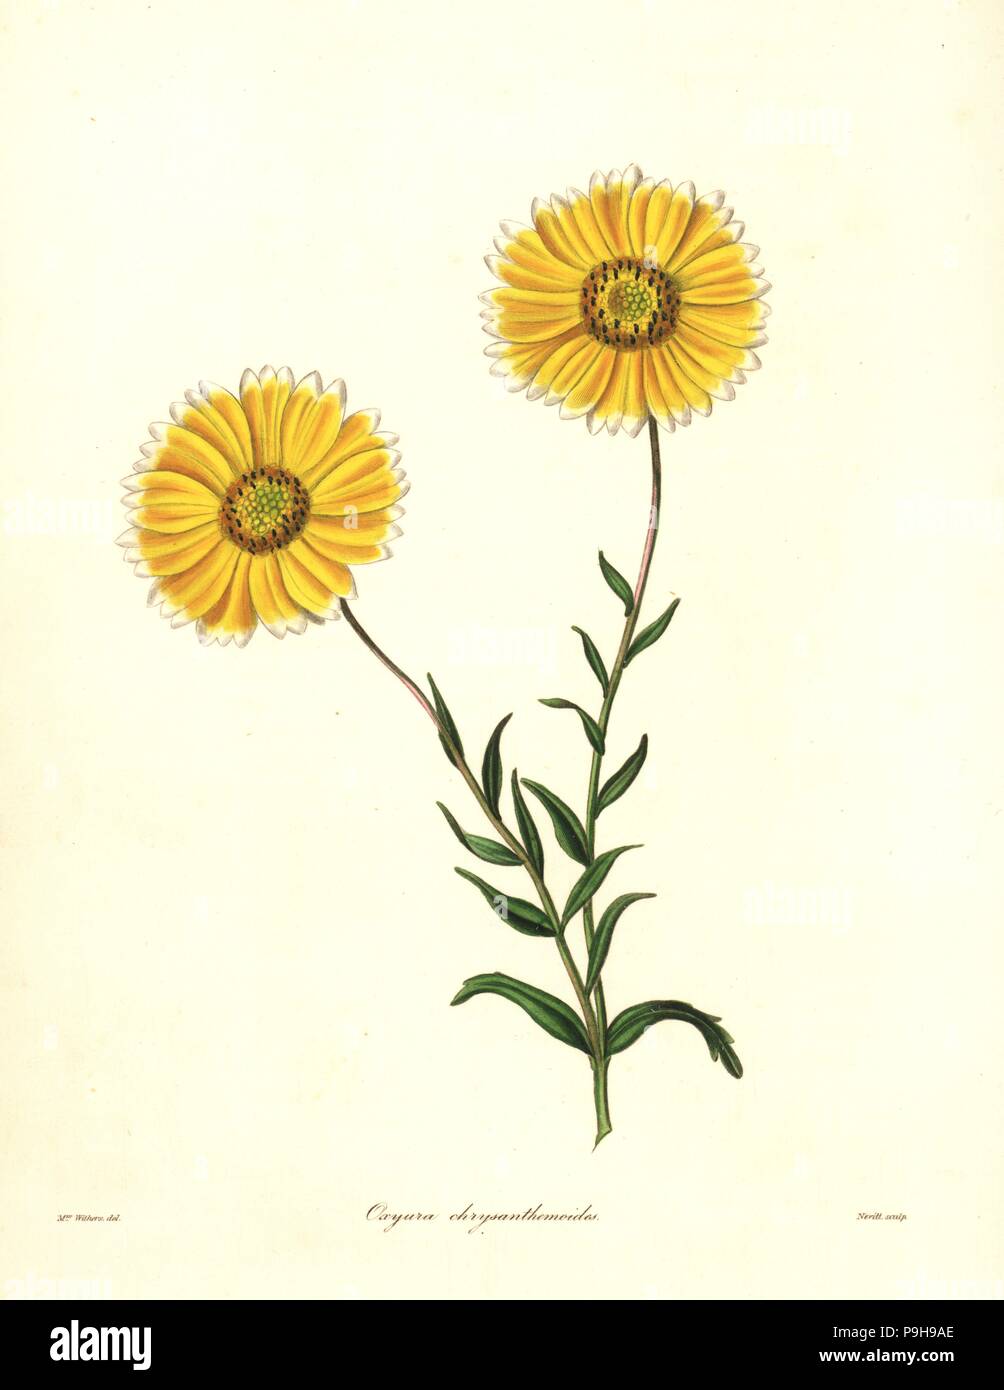 Smooth layia, Layia chrysanthemoides (Chrysanthemum-like oxyura, Oxyura chrysanthemoides). Handcoloured copperplate engraving by S. Nevitt after a botanical illustration by Mrs Augusta Withers from Benjamin Maund and the Rev. John Stevens Henslow's The Botanist, London, 1836. Stock Photo